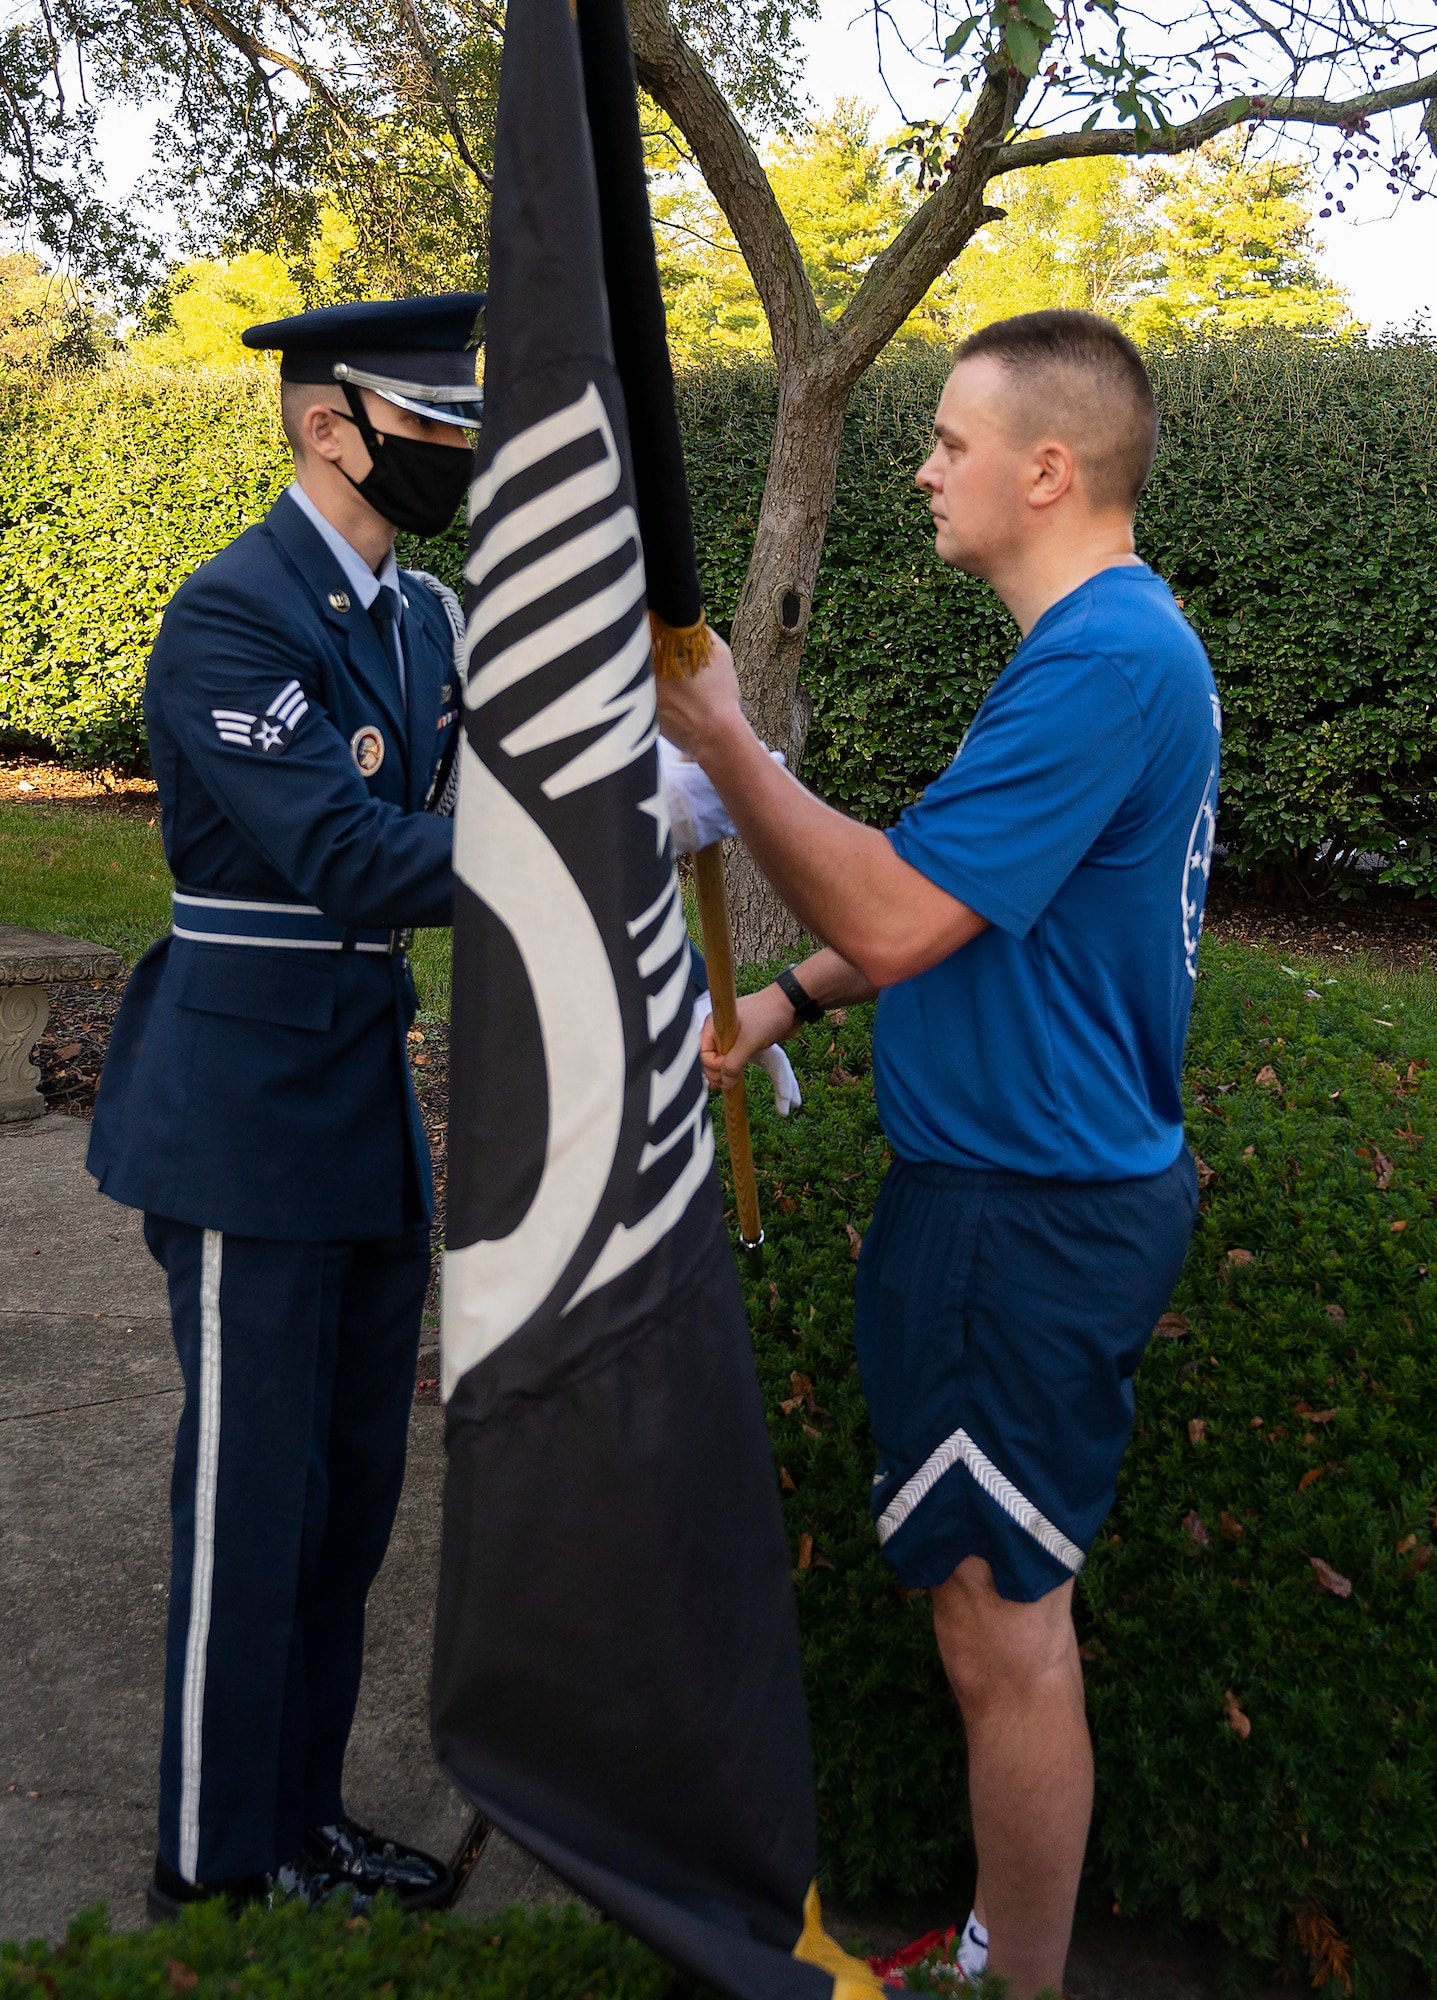 Chief Master Sgt. Chris Sutor, National Air and Space Intelligence Center,  hands the POW/MIA Flag to an Honor Guard Airman during the POW/MIA Recognition Day wreath-laying ceremony Sept. 17, 2021, at Wright-Patterson Air Force Base, Ohio. The flag was carried by runners on a 6.2-mile course through the base on its way to the ceremony.  (U.S. Air Force photo by R.J. Oriez)